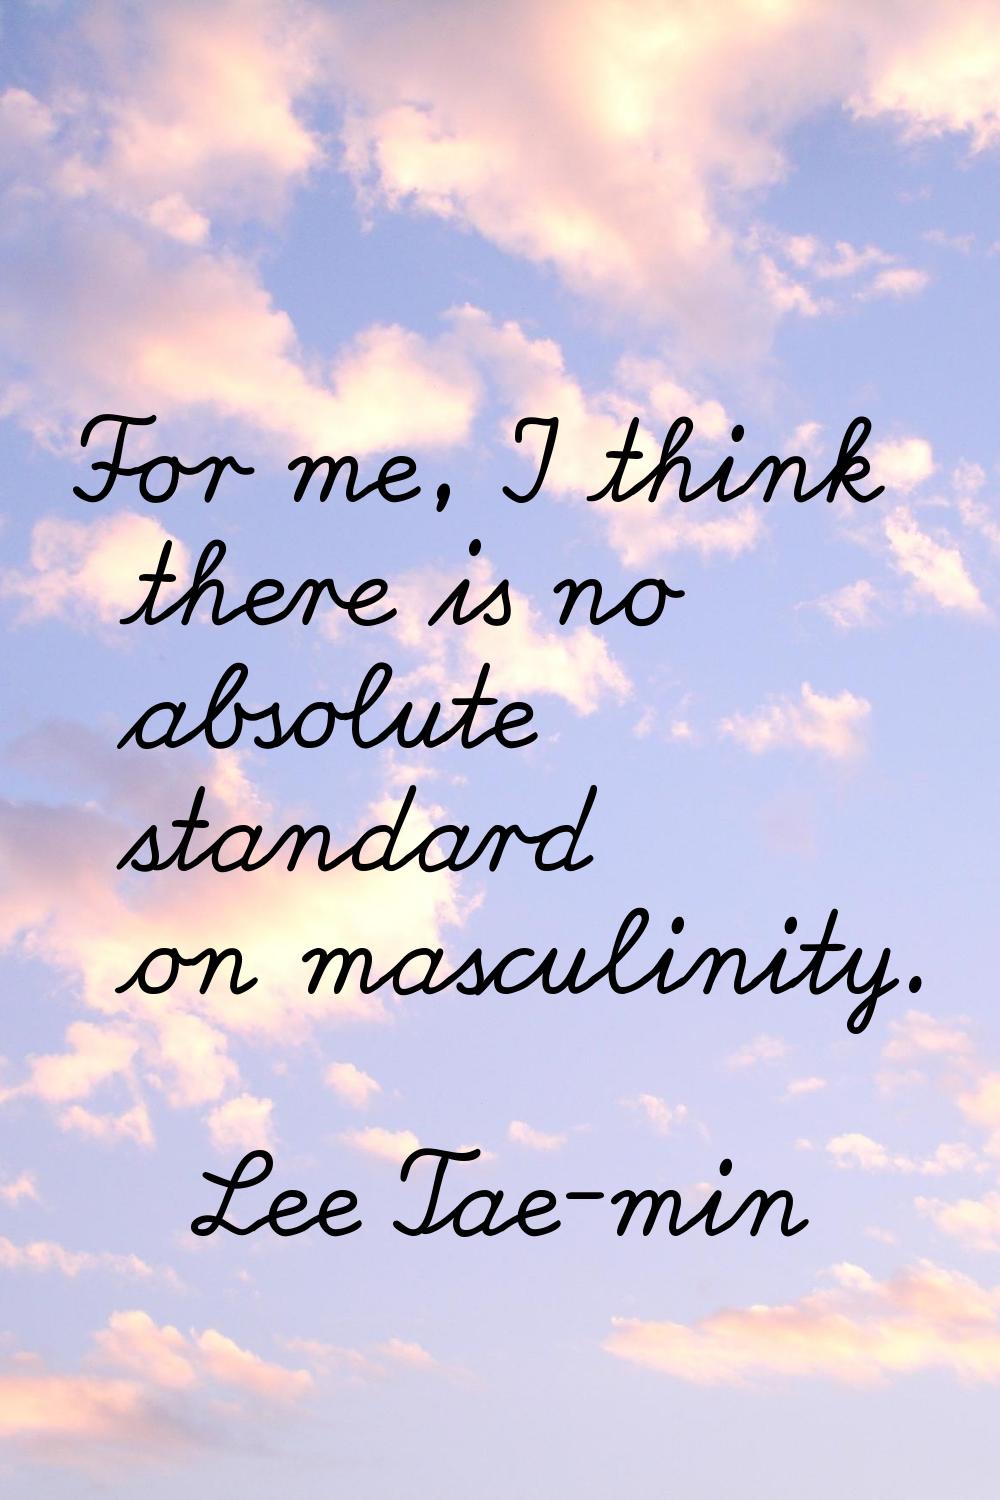 For me, I think there is no absolute standard on masculinity.